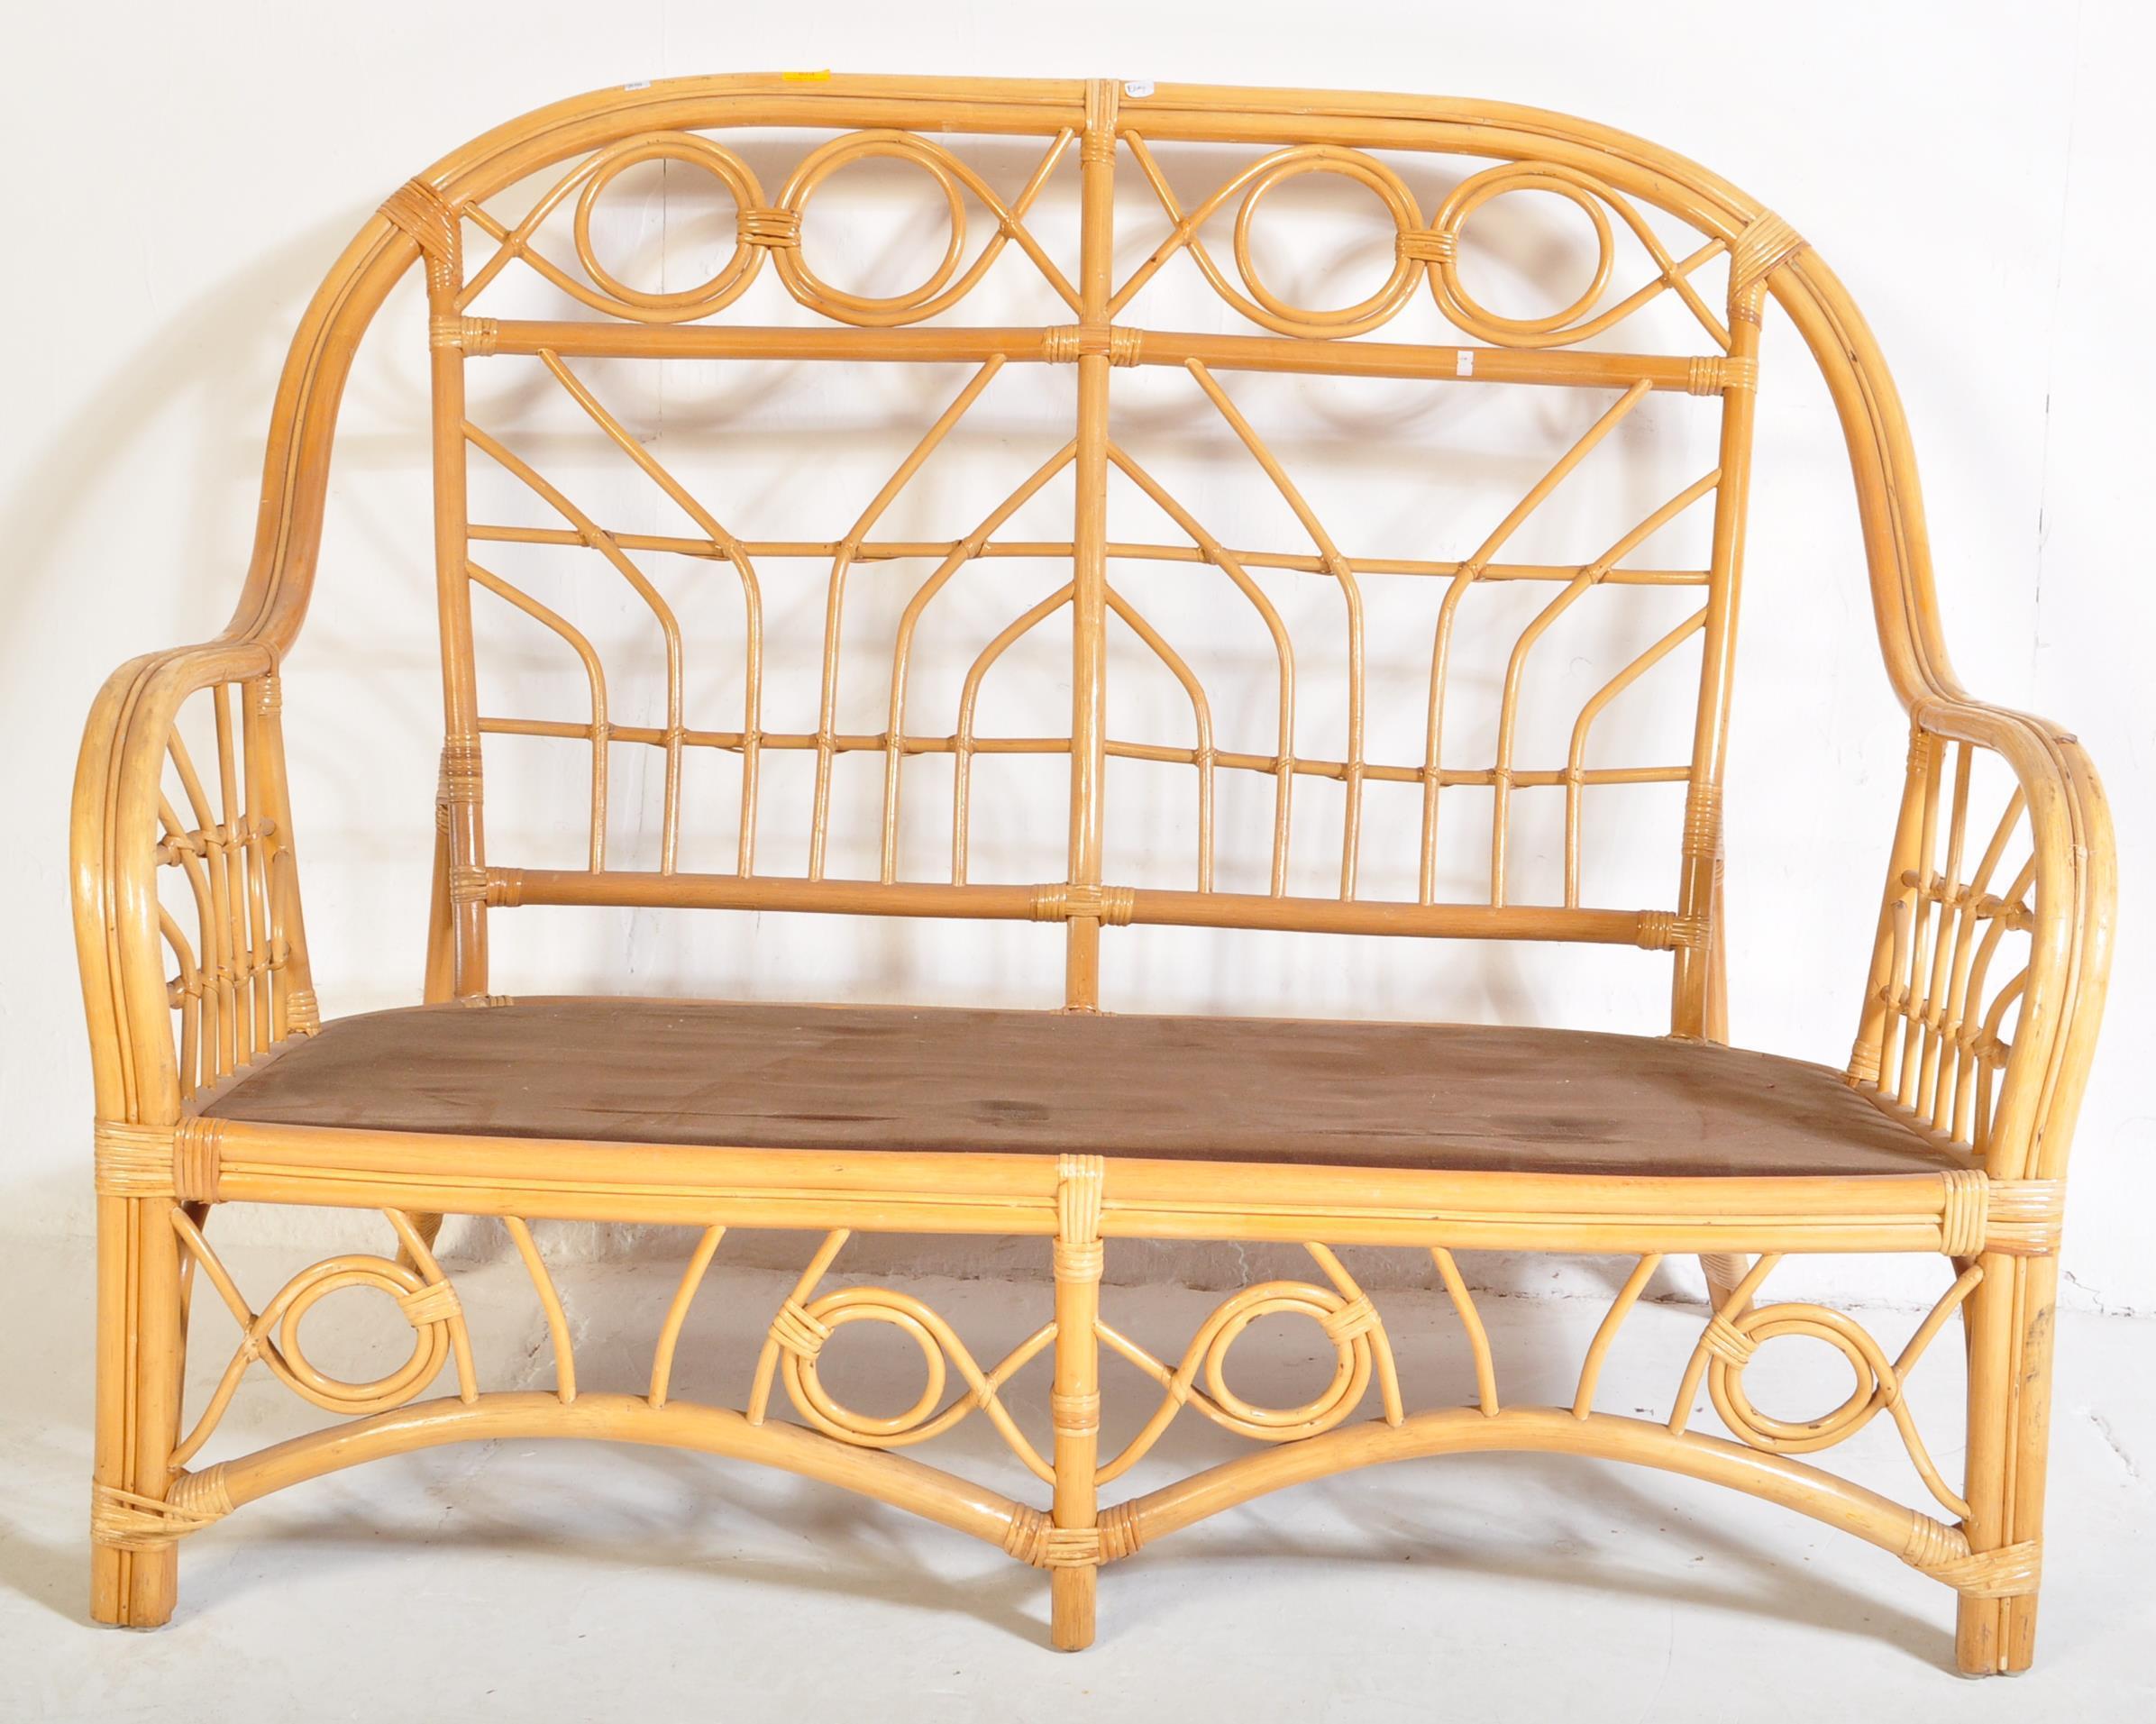 MID 20TH CENTURY BAMBOO CONSERVATORY SOFA CHAIR - Image 2 of 4